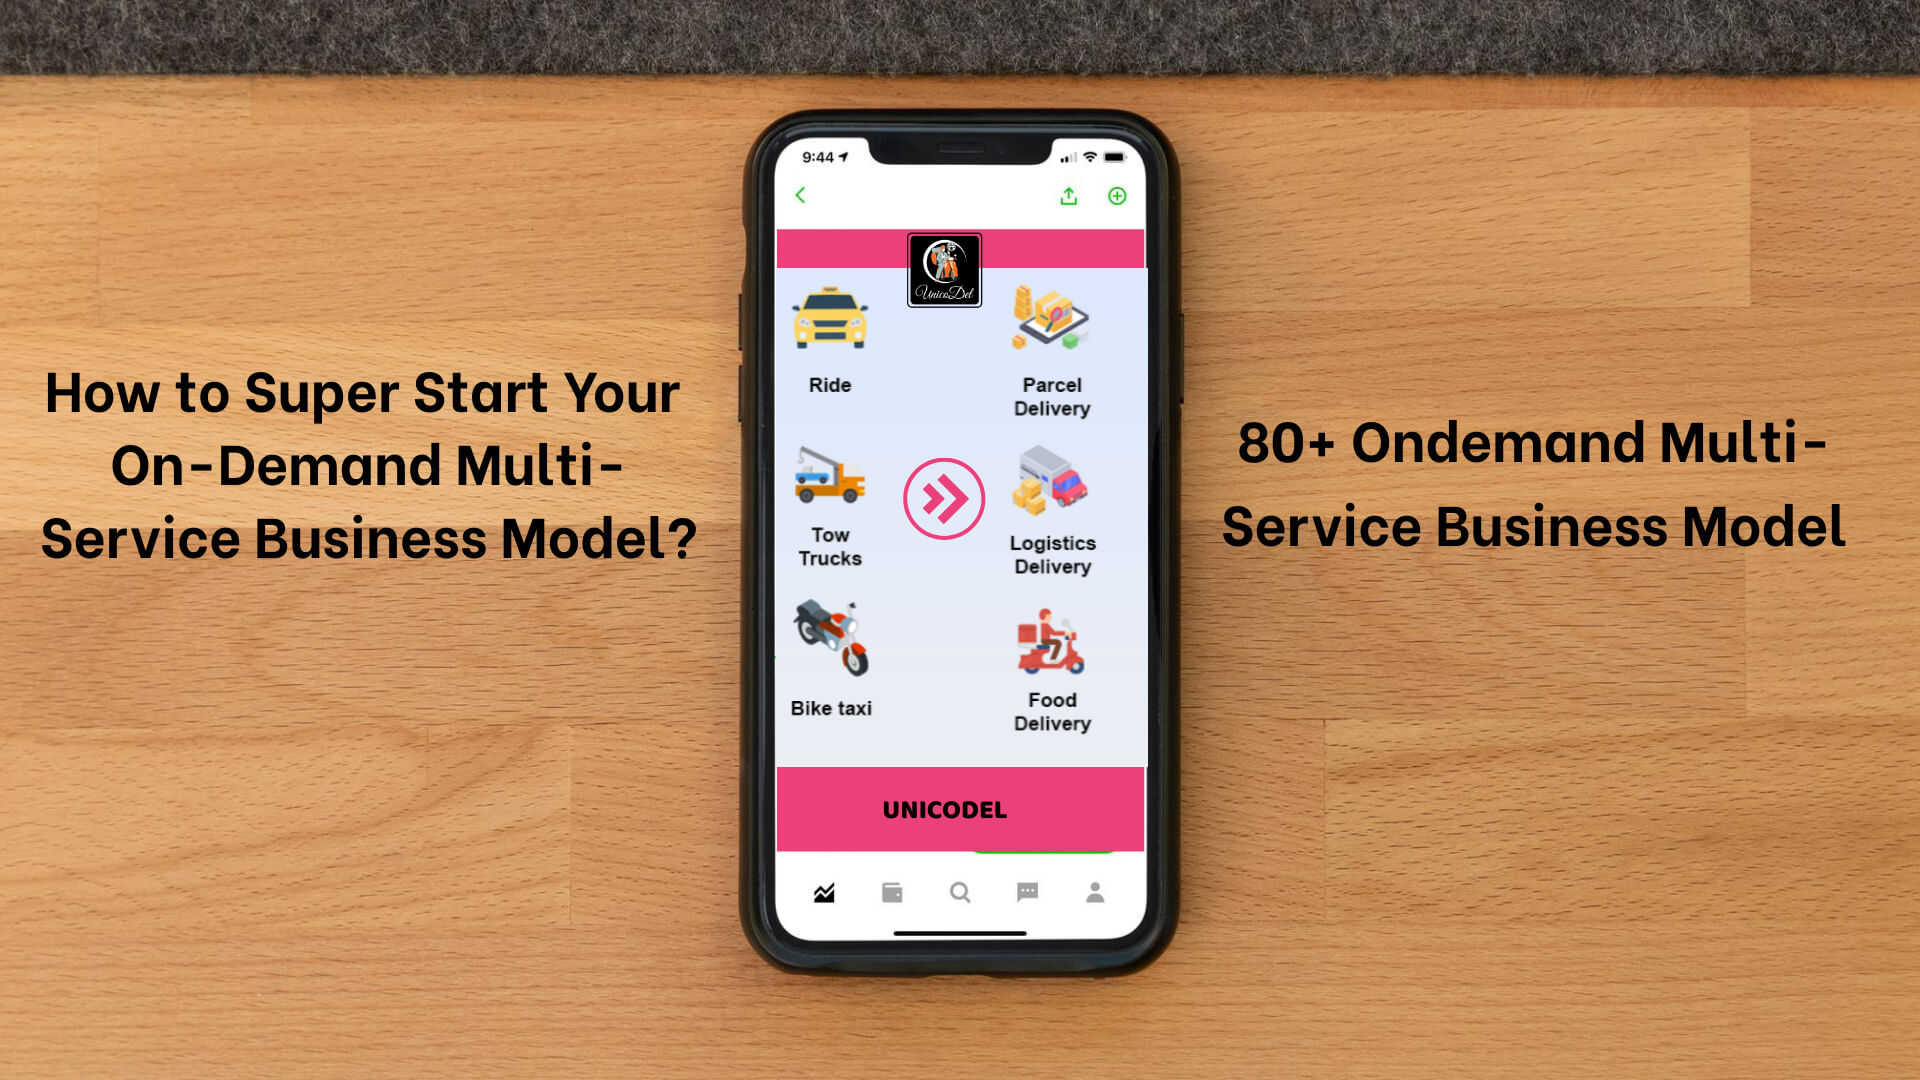 How to Super Start Your On-Demand Multi-Service Business Model?